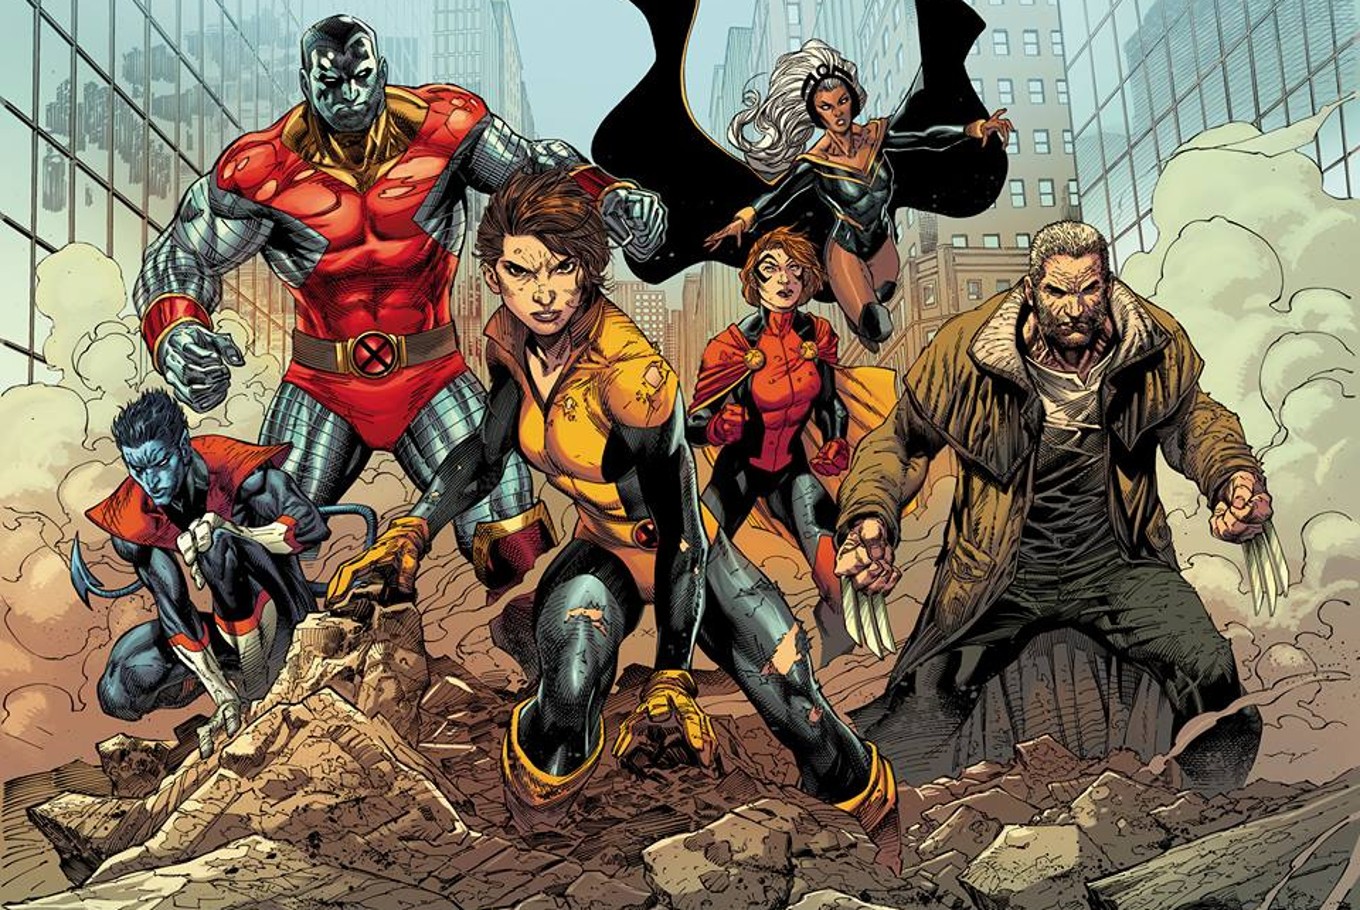 Refkes Xxx Video - Indonesian 'X-Men Gold' comic writer inserts anti-Ahok references in comic  book, ignites controversy - Art & Culture - The Jakarta Post